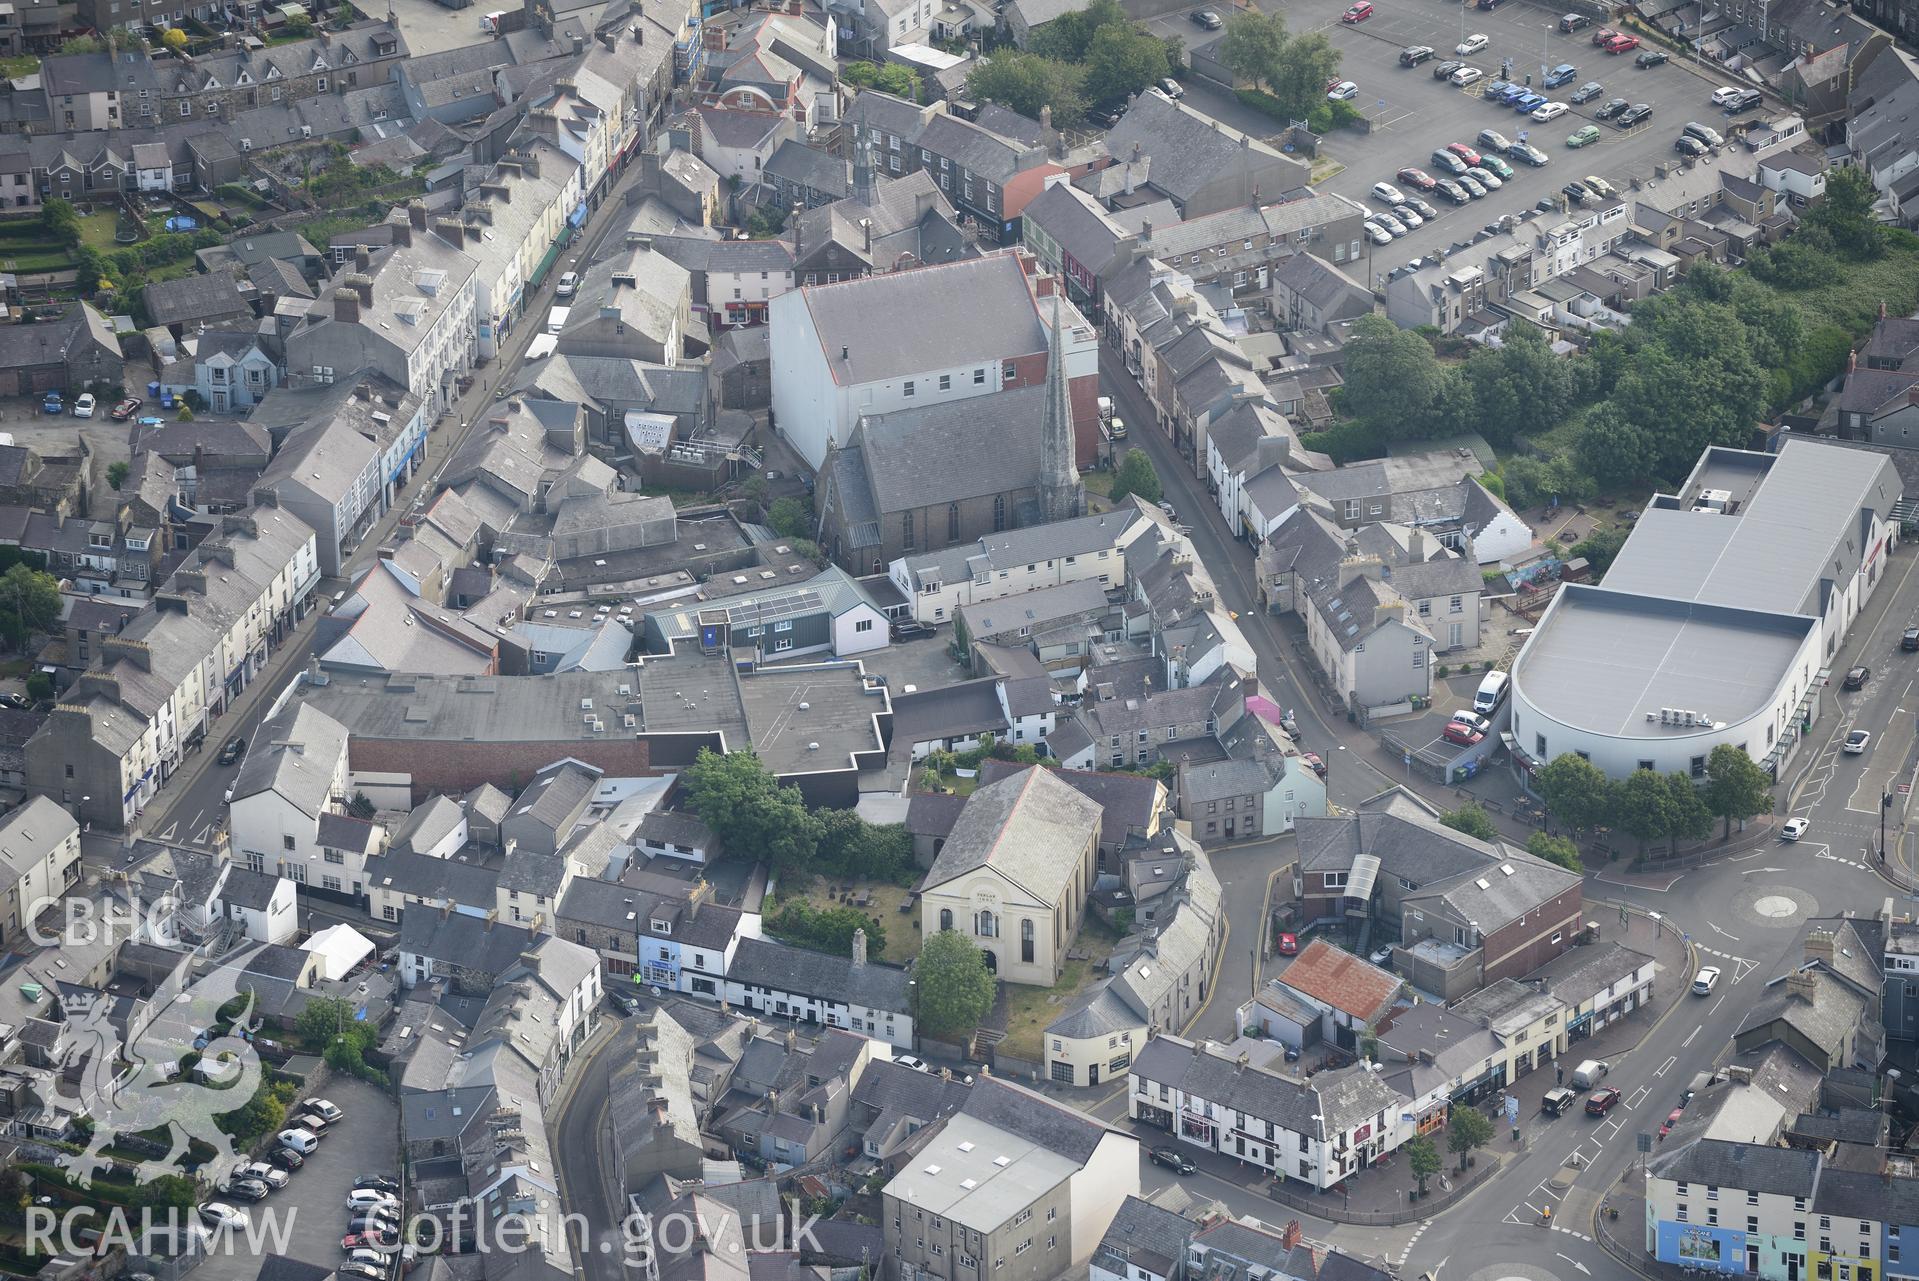 Pen-Lan Independent Chapel; Tabernacl Baptist Chapel, old Town Hall and new Town Hall (cinema), Pwllheli. Oblique aerial photograph taken during the Royal Commission's programme of archaeological aerial reconnaissance by Toby Driver on 23rd June 2015.